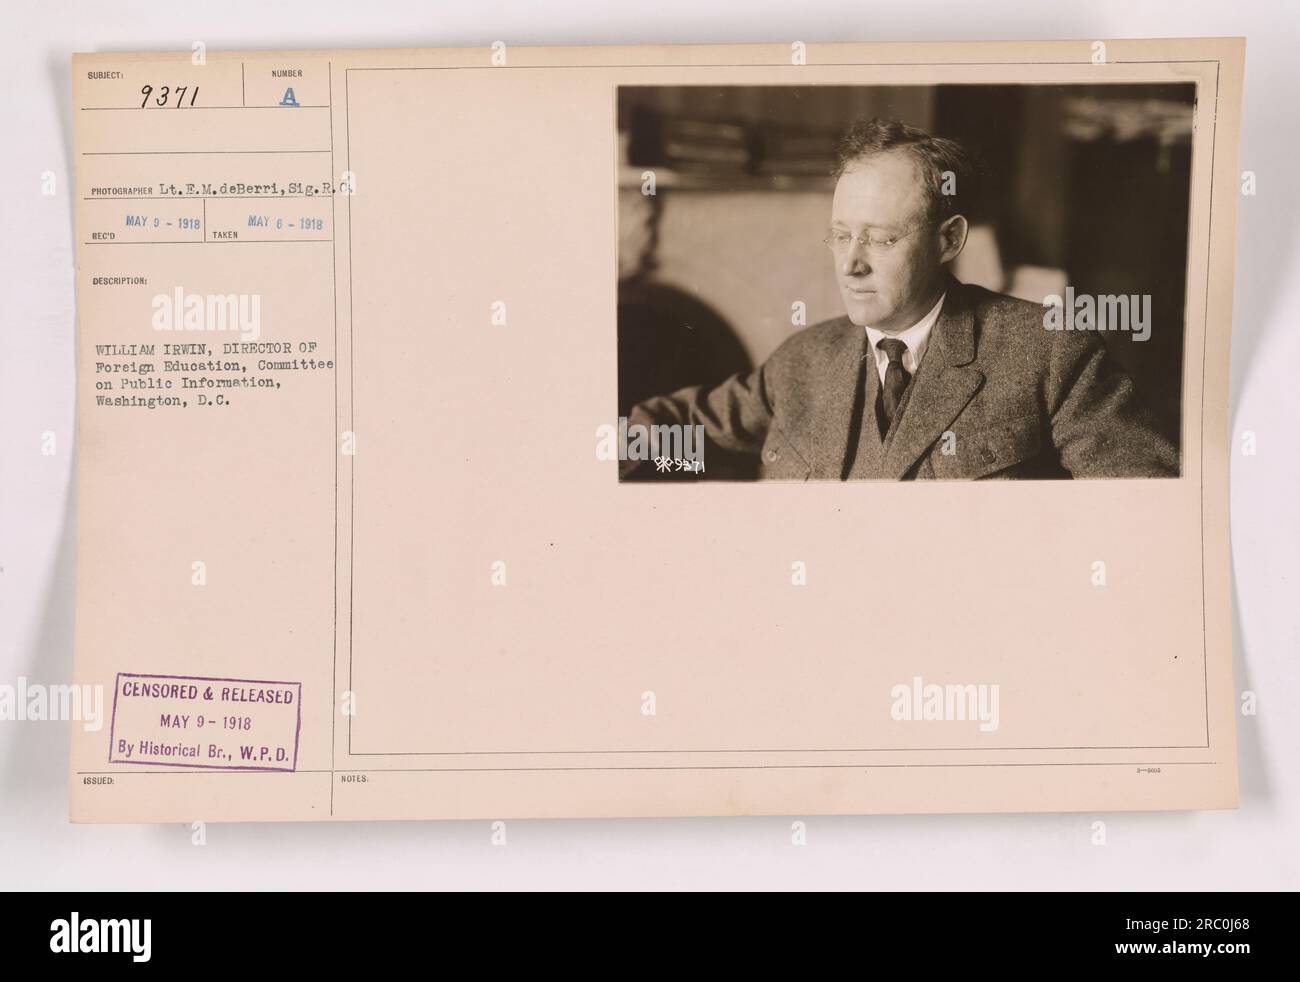 A photograph taken by Lieutenant E.M. deBerri, Sig.R.C., on May 9, 1918. The image features William Irwin, the Director of Foreign Education for the Committee on Public Information in Washington, D.C. The photograph was censored and released by the Historical Branch, W.P.D. It is labeled as subject 'REC'D 9371' with the description 'BLED NUNDER A TAKES MAY-1918.' Stock Photo